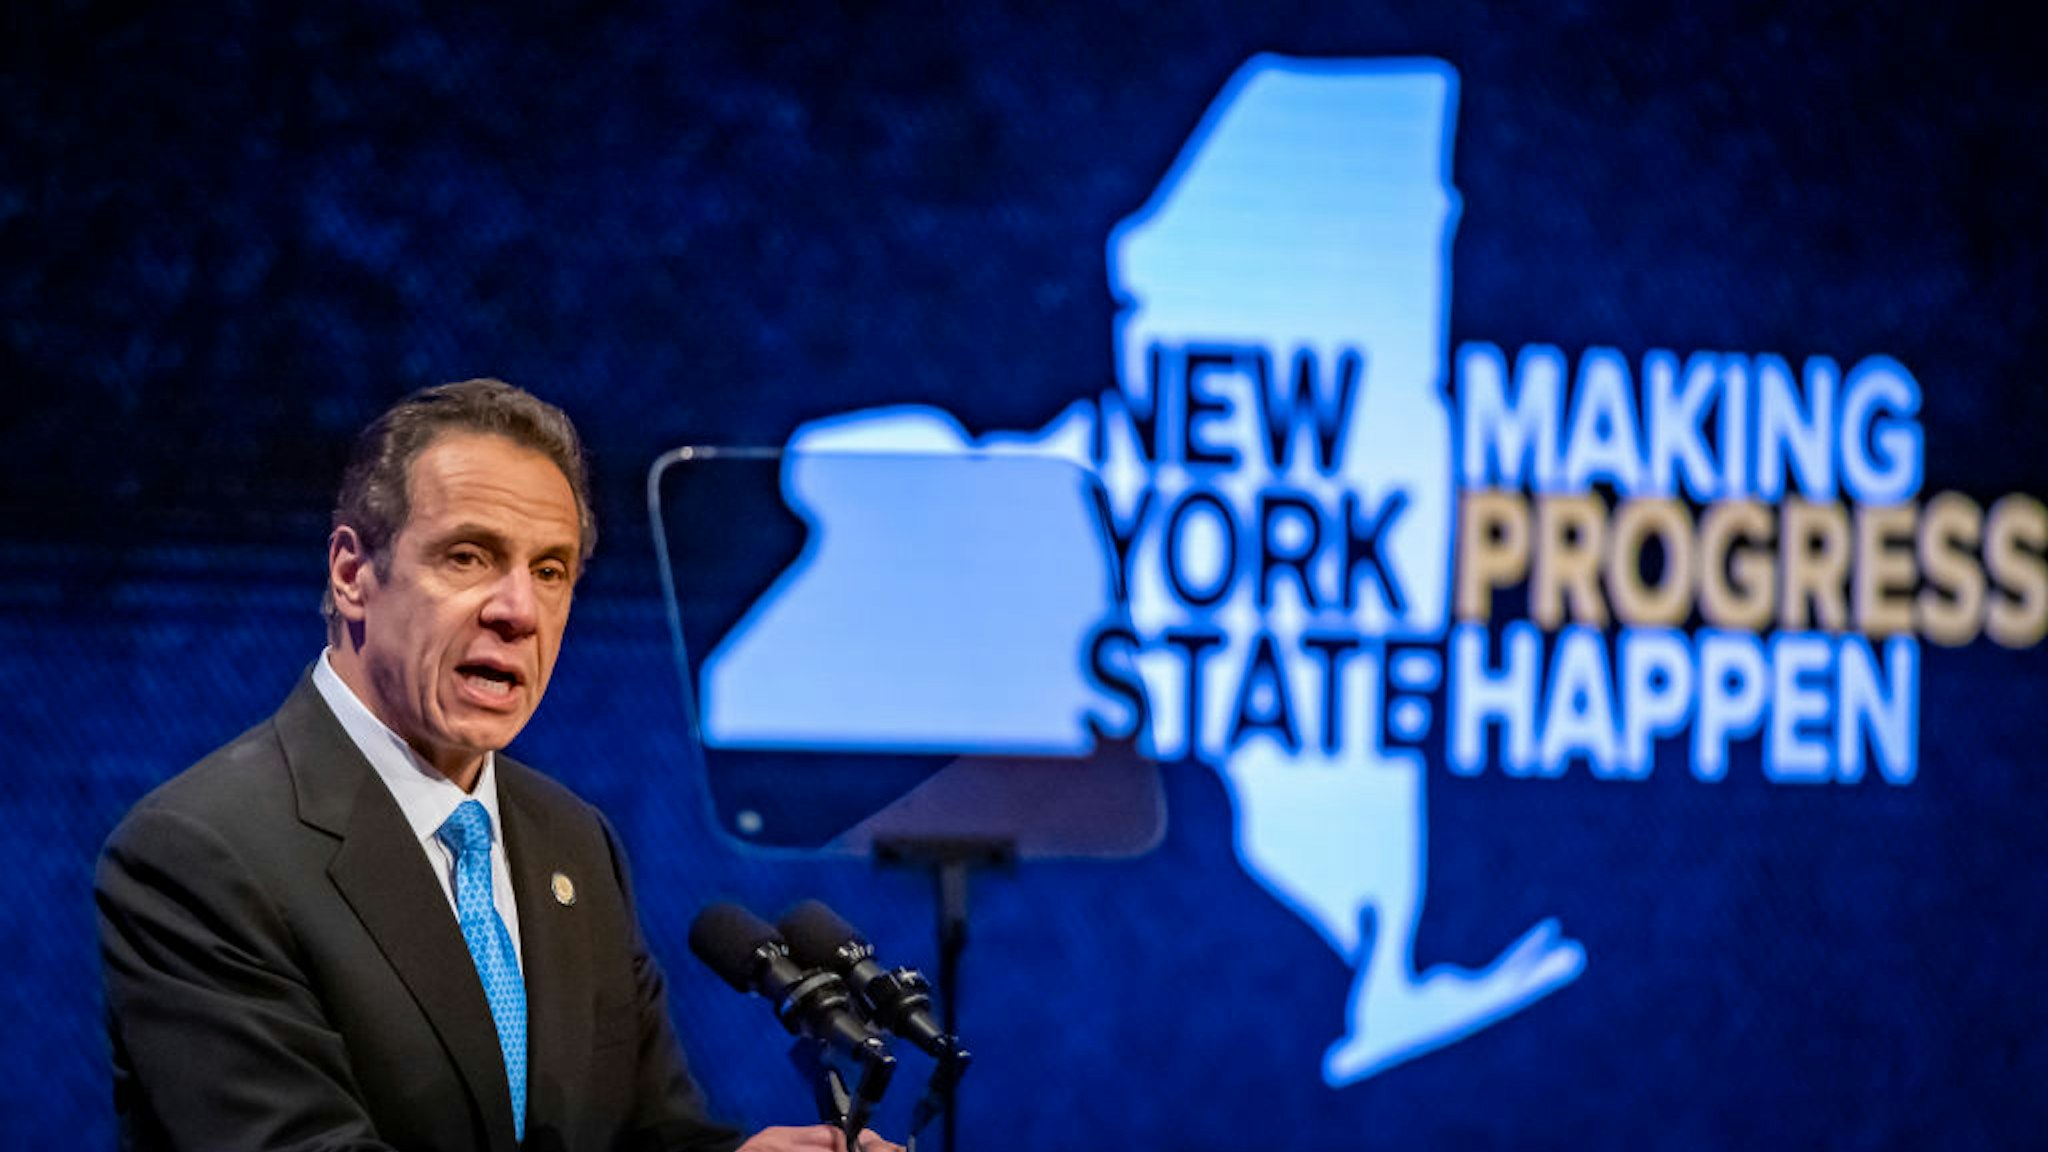 Gov. Andrew Cuomo during his State of the State address at the Empire State Plaza Convention Center in Albany, New York on January 8, 2020.